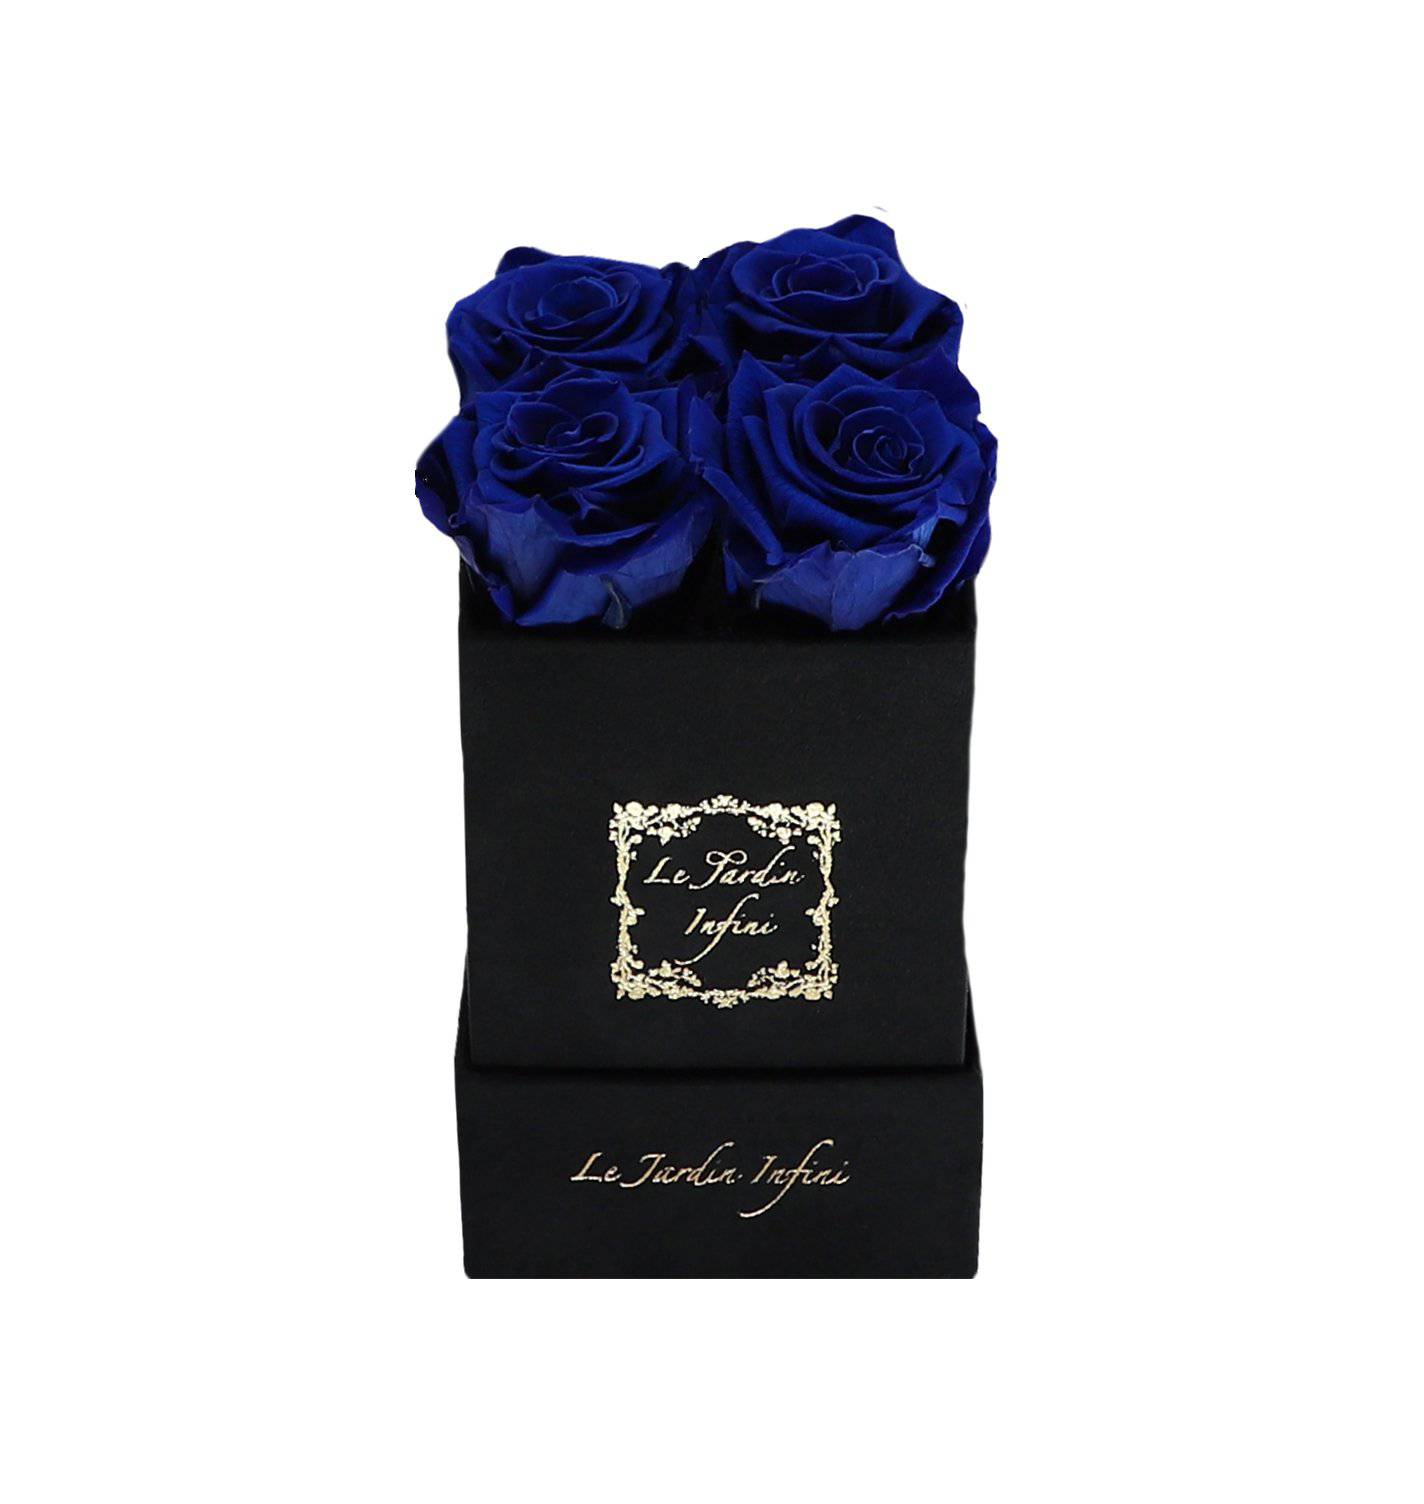 Royal Blue Preserved Roses - Small Square Black Suede Box - Le Jardin Infini Roses in a Box